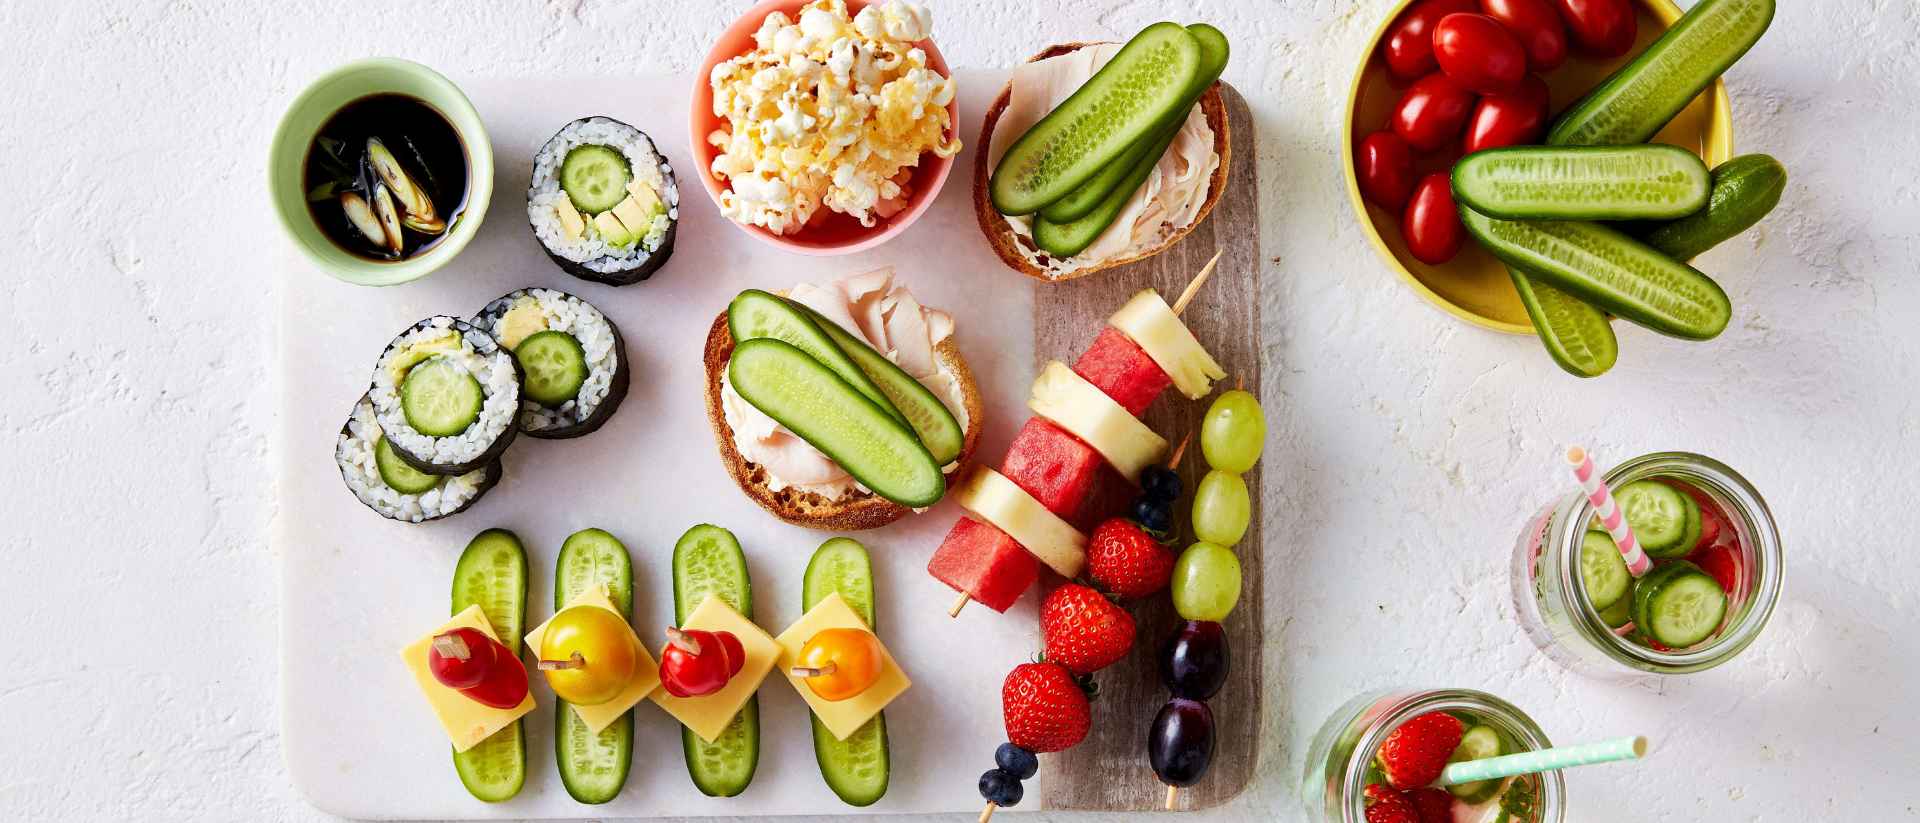 After School Snack Board With Fruits And Vegetables Recipe 